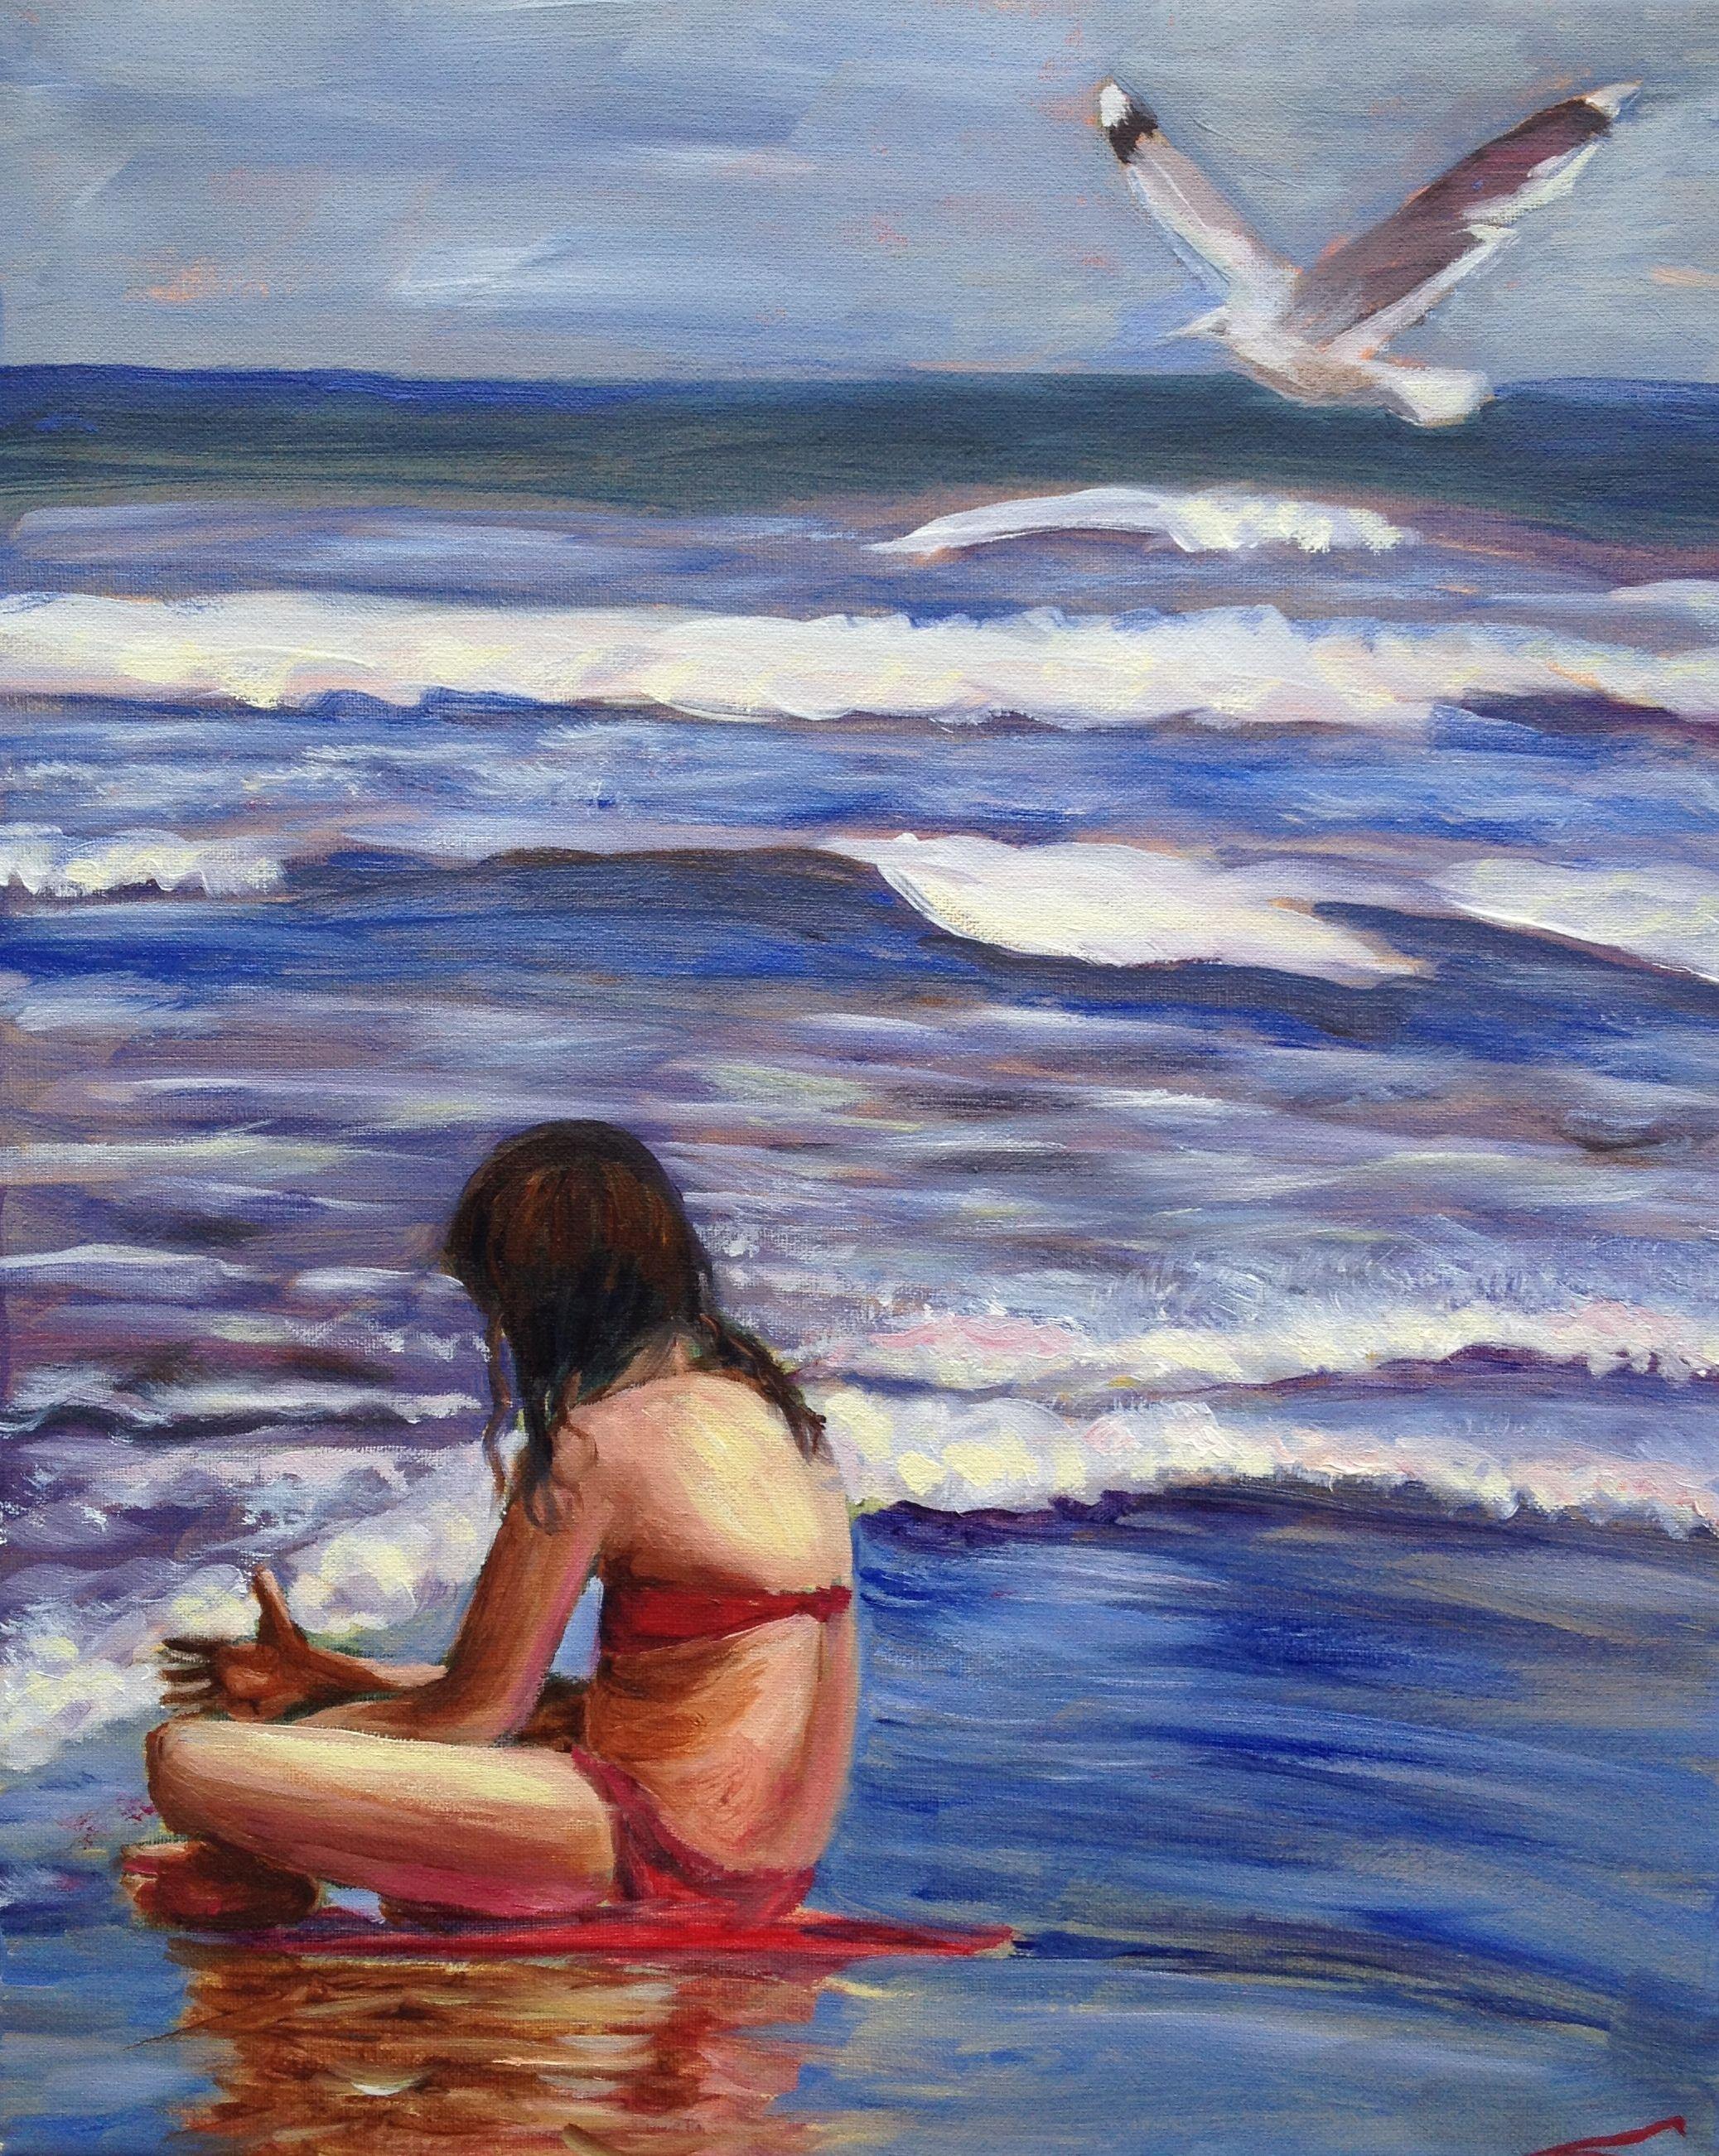 Girl at the sea. Alla prima oil painting with few final tuches when dry. Beach Paintings always inspire thoughts of holidays, long walks, warm breezes and relaxation. beach and ocean themed paintings that will bring the outdoors inside and brighten